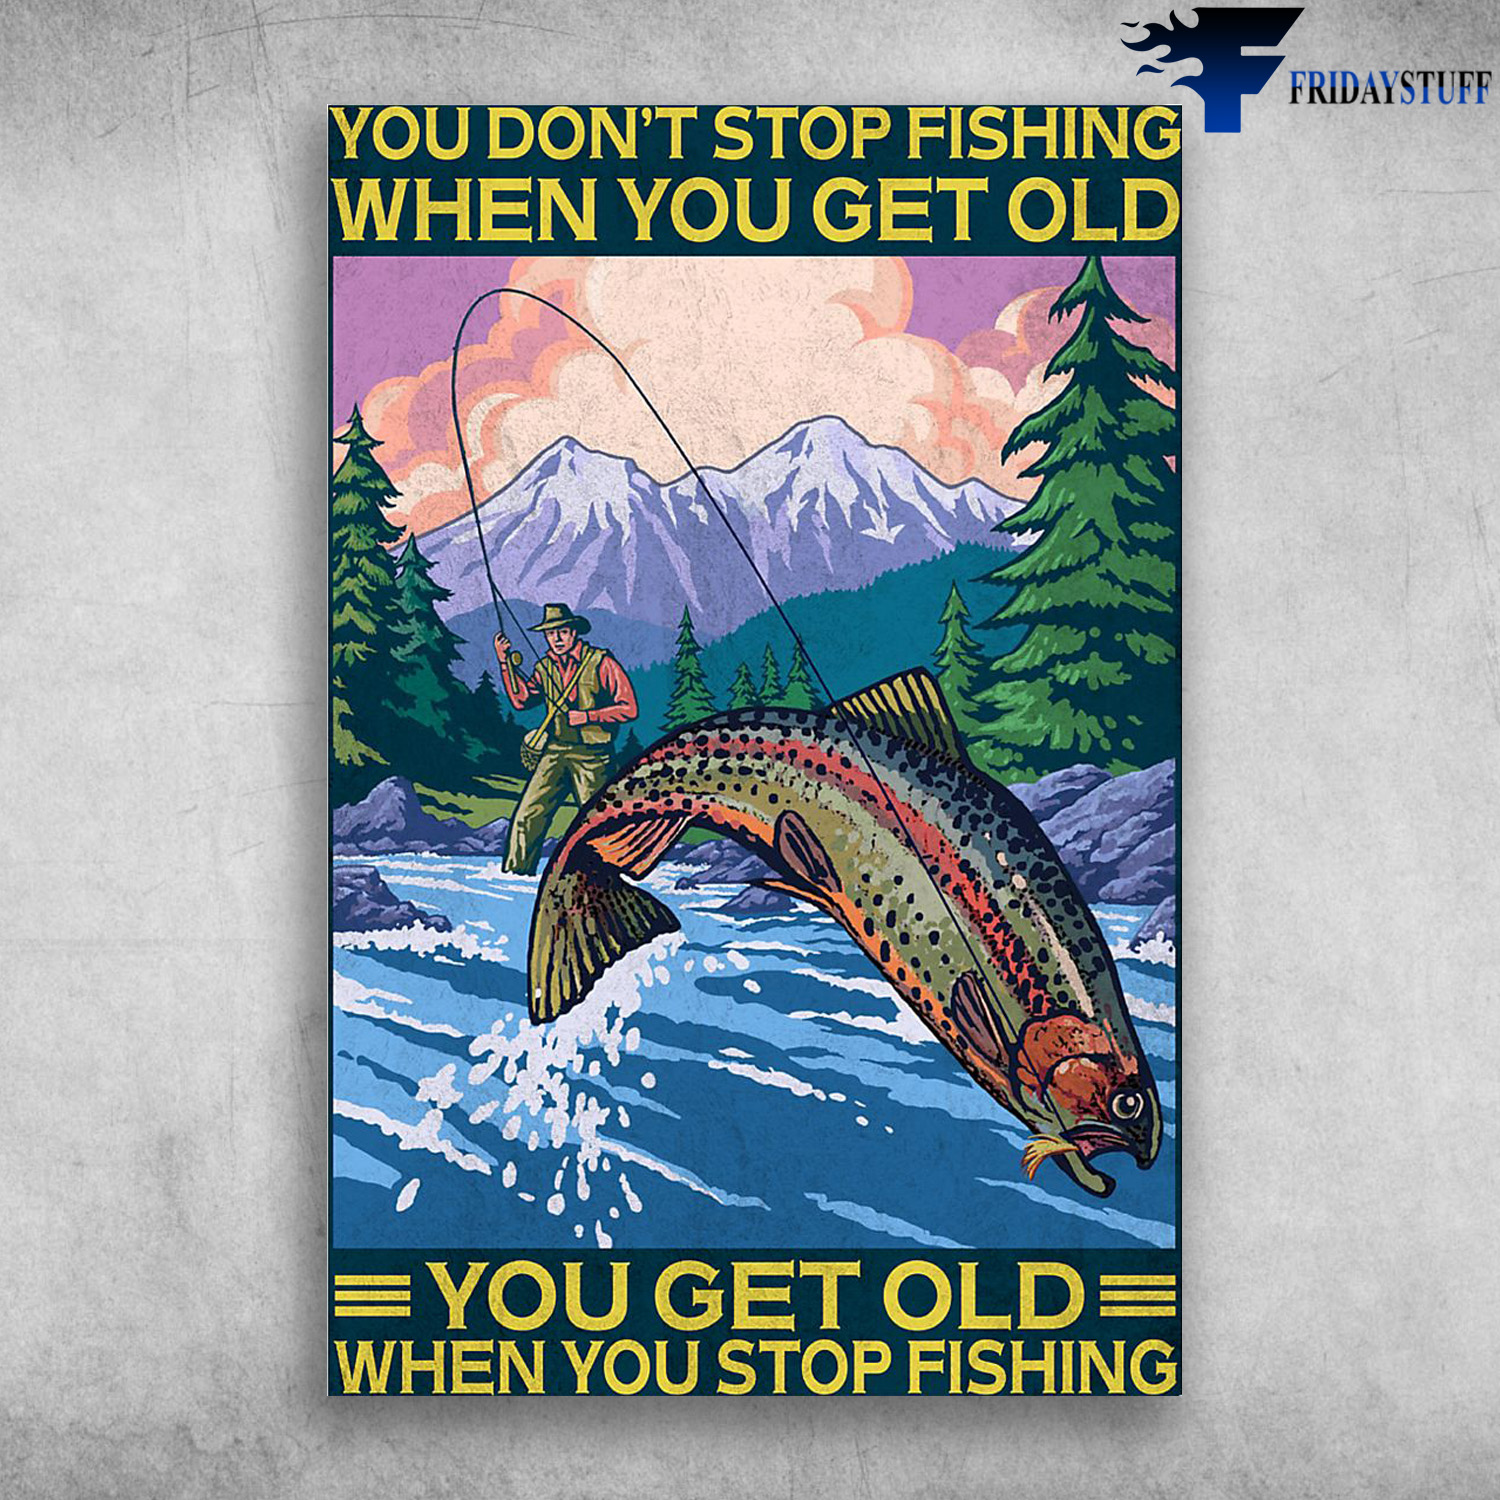 https://arthoodie.com/wp-content/uploads/2020/12/Man-Fishing-With-The-Salmon-You-Dont-Stop-Fishing-When-You-Get-Old.jpg